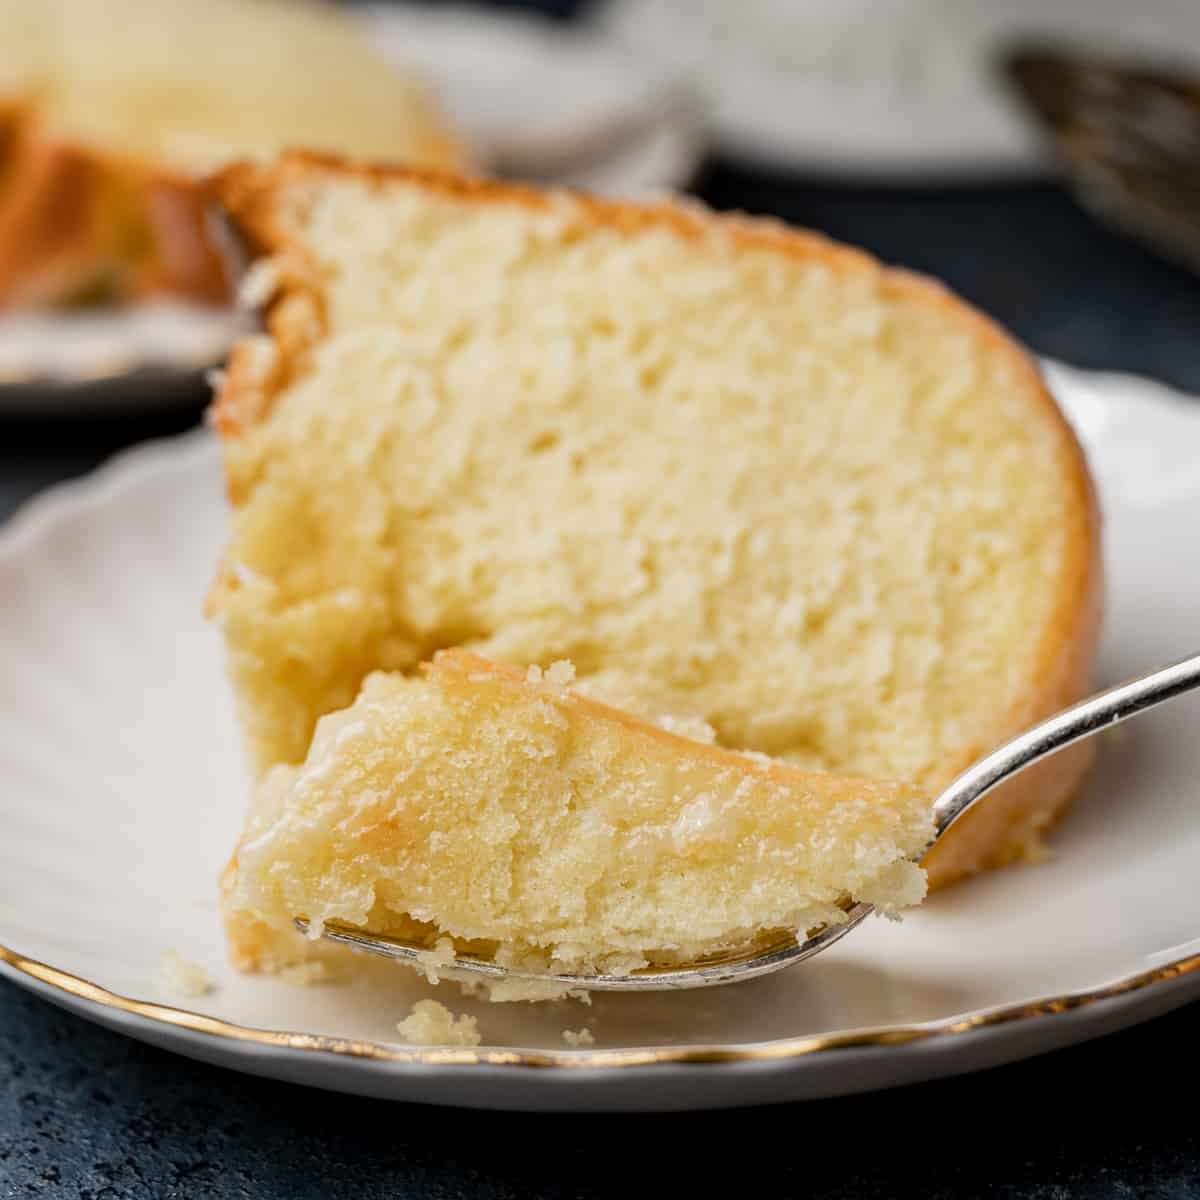 a slice of pound cake on a plate with a bite on a fork